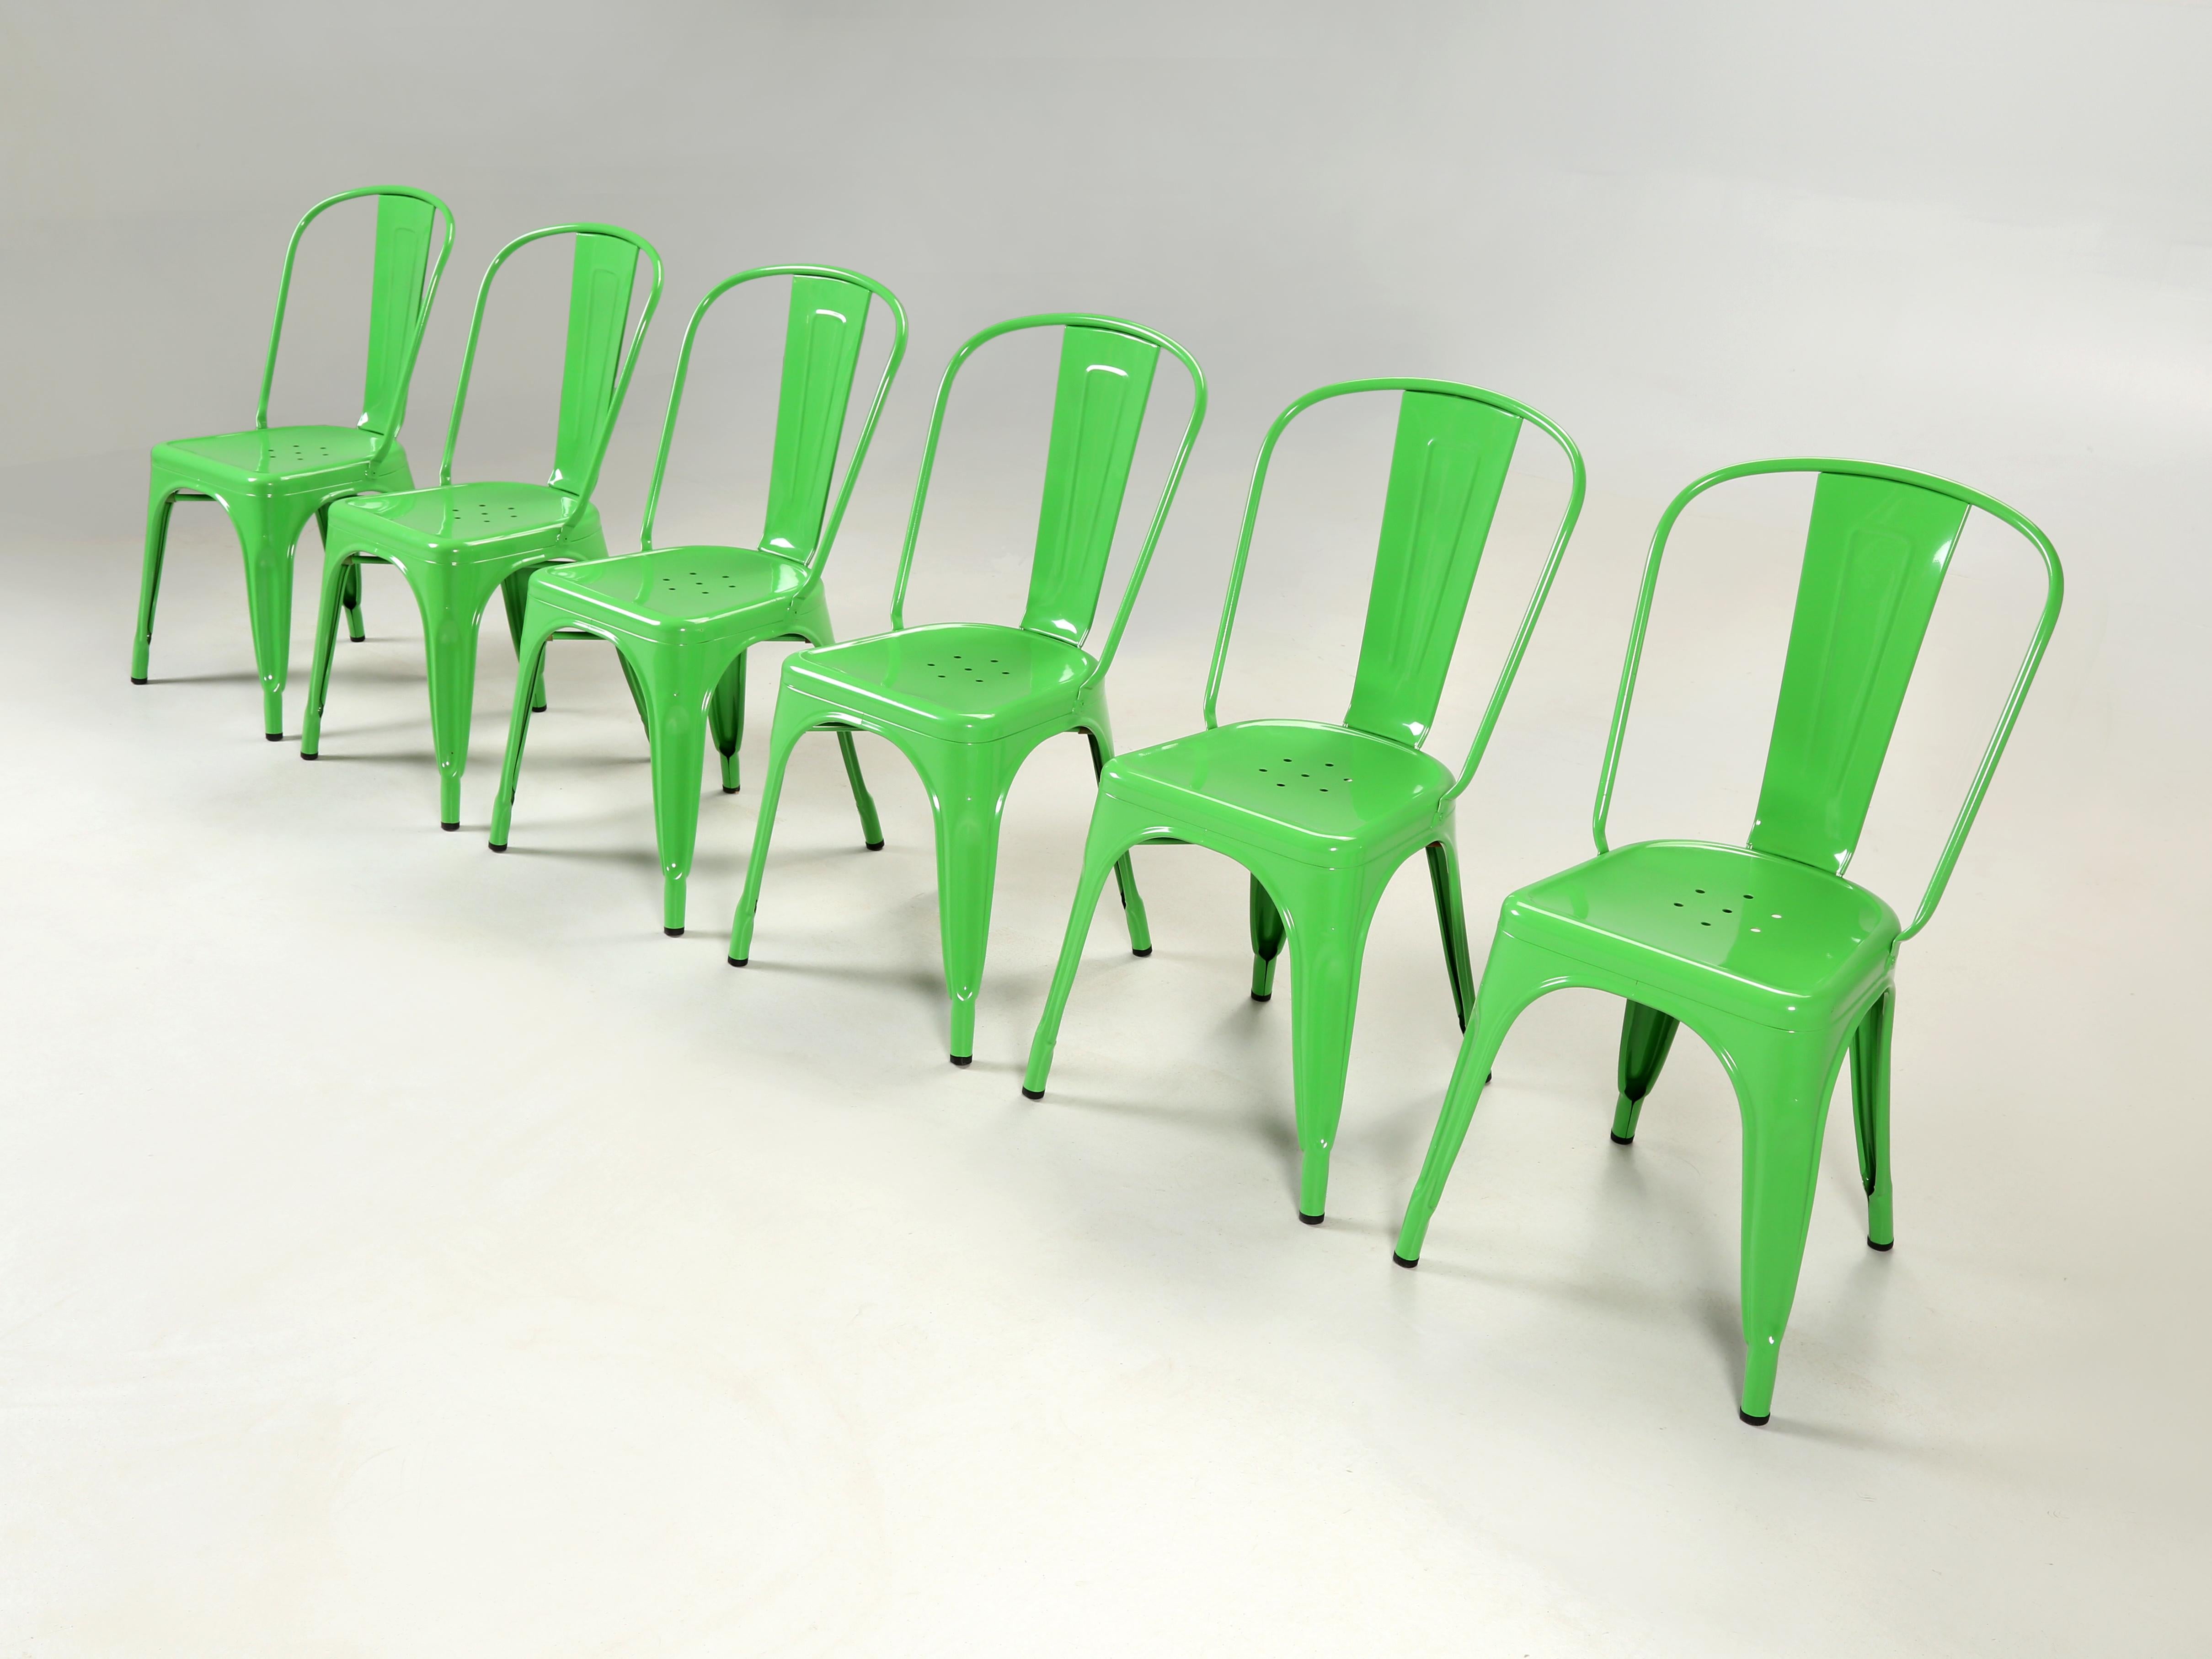 Genuine French Tolix chairs that were designed so that you can safely (according to Tolix that is) stack the steel chairs twelve high. Currently we have over (1500) pieces of authentic French Tolix in stock, but only one set of (6) bright green